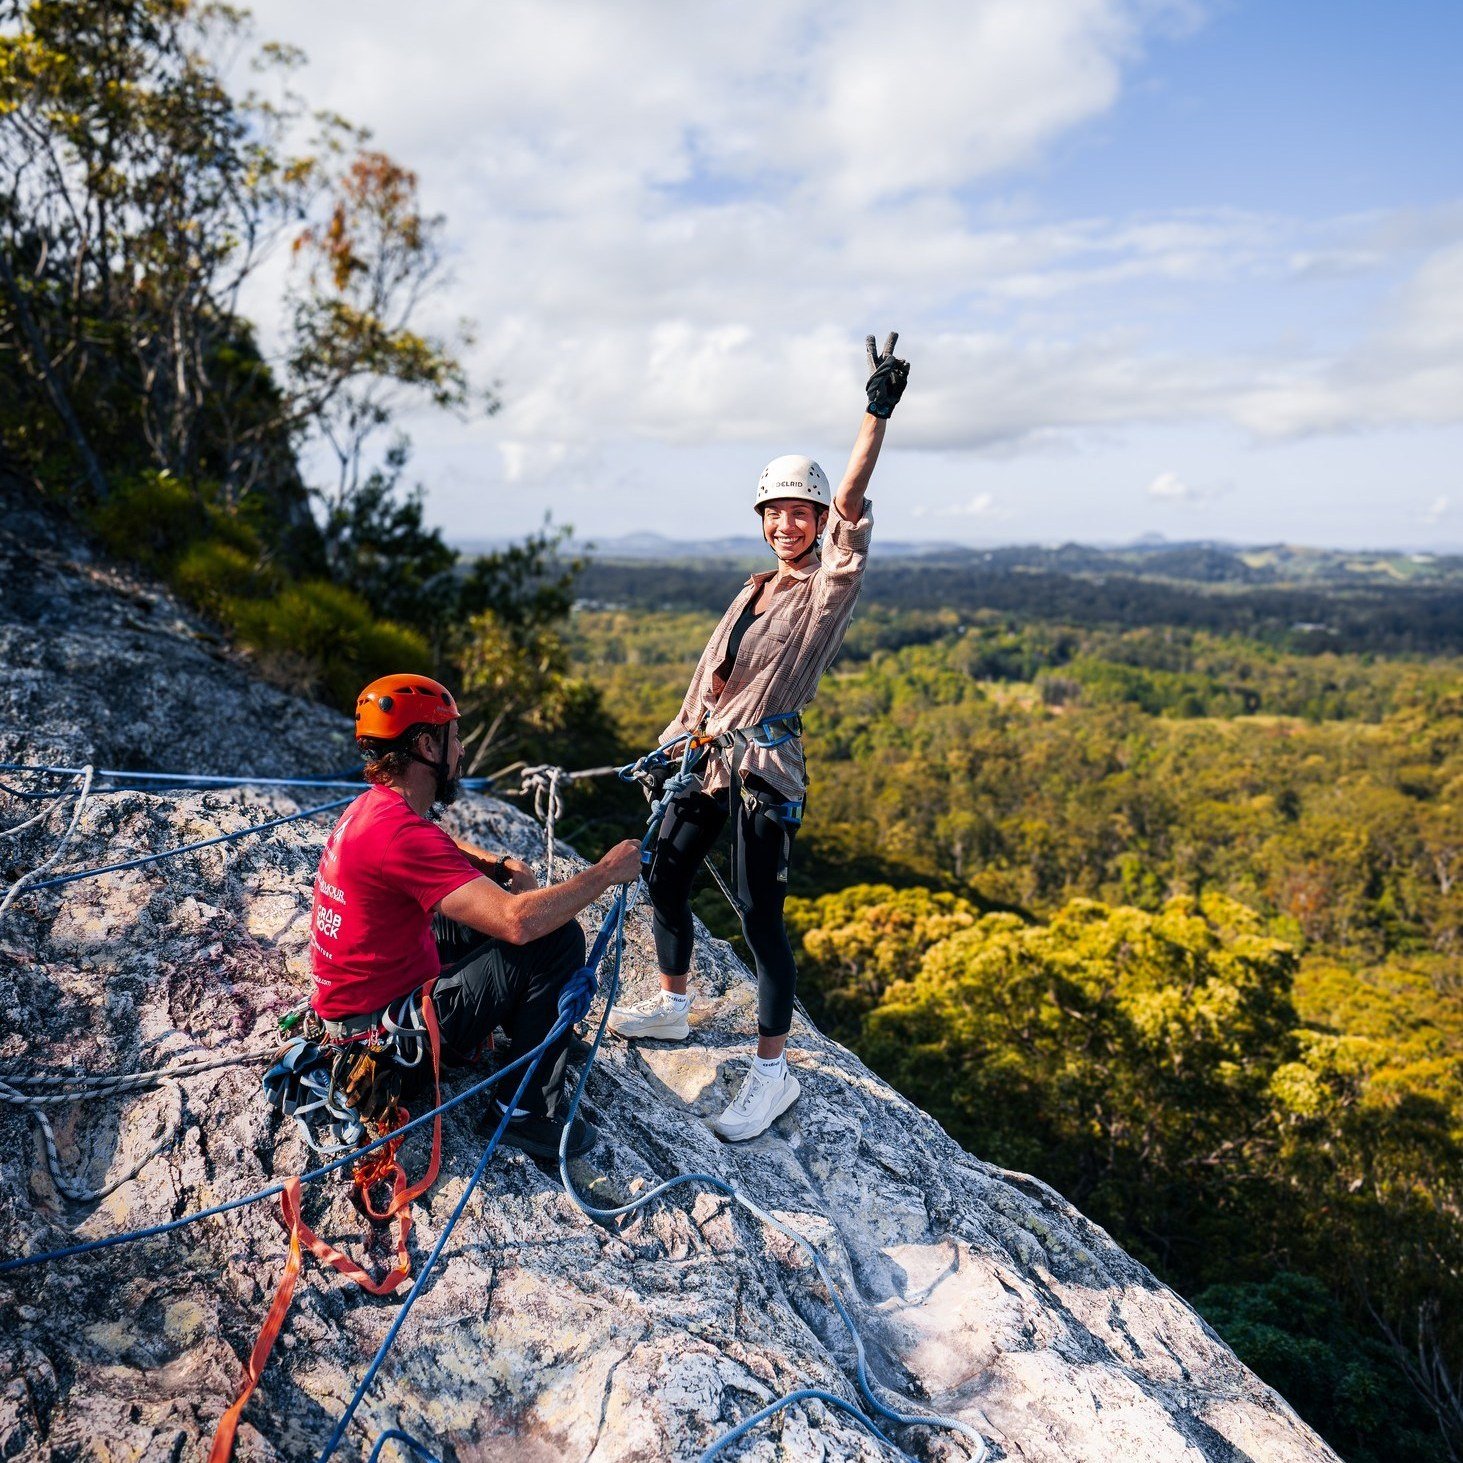 Looking for the best guided activities on the sunshine coast? Look no further!! We offer a range of tours from Abseiling, Rock Climbing, Hiking and now Kayaking! Finding your next weekend adventure couldn't be easier!
www.outdooradventureaustralia.co